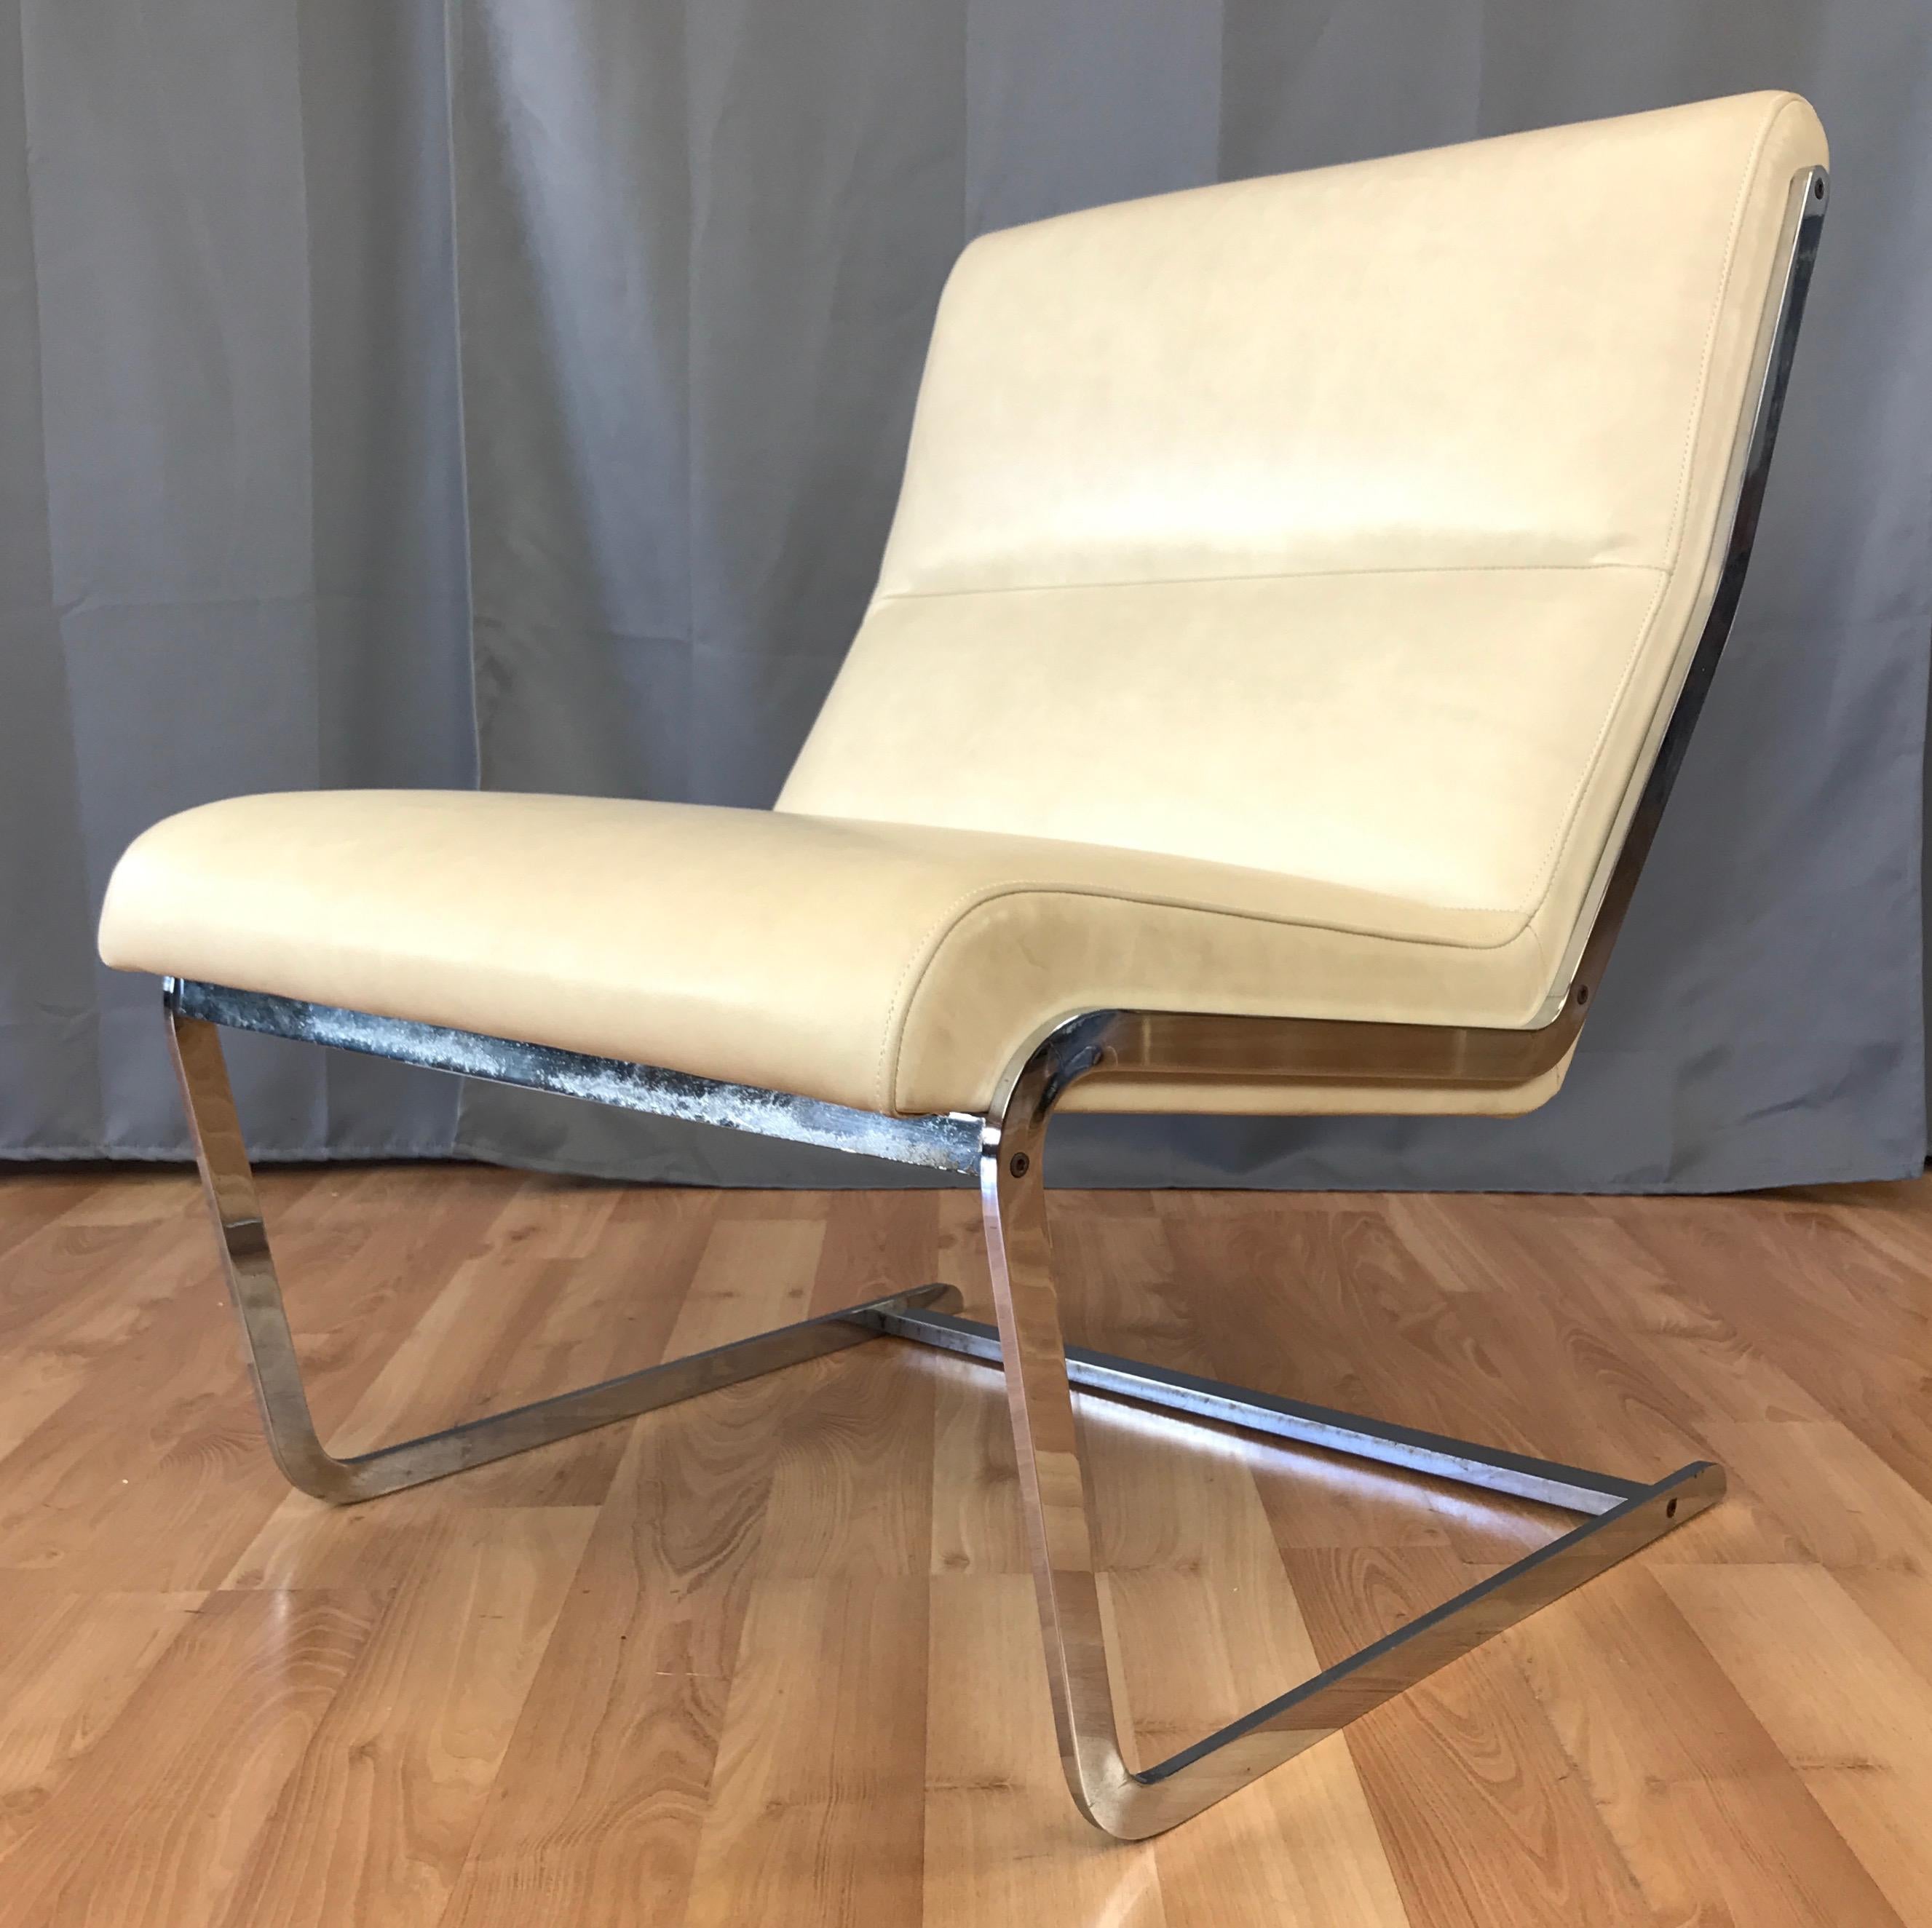 An uncommon leather and chrome cantilevered lounge chair by master of Scandinavian Modern minimalism Poul Nørreklit.

Heavy frame of flat bar steel with a polished chrome-like finish. Sleek seat freshly reupholstered in super supple high grade